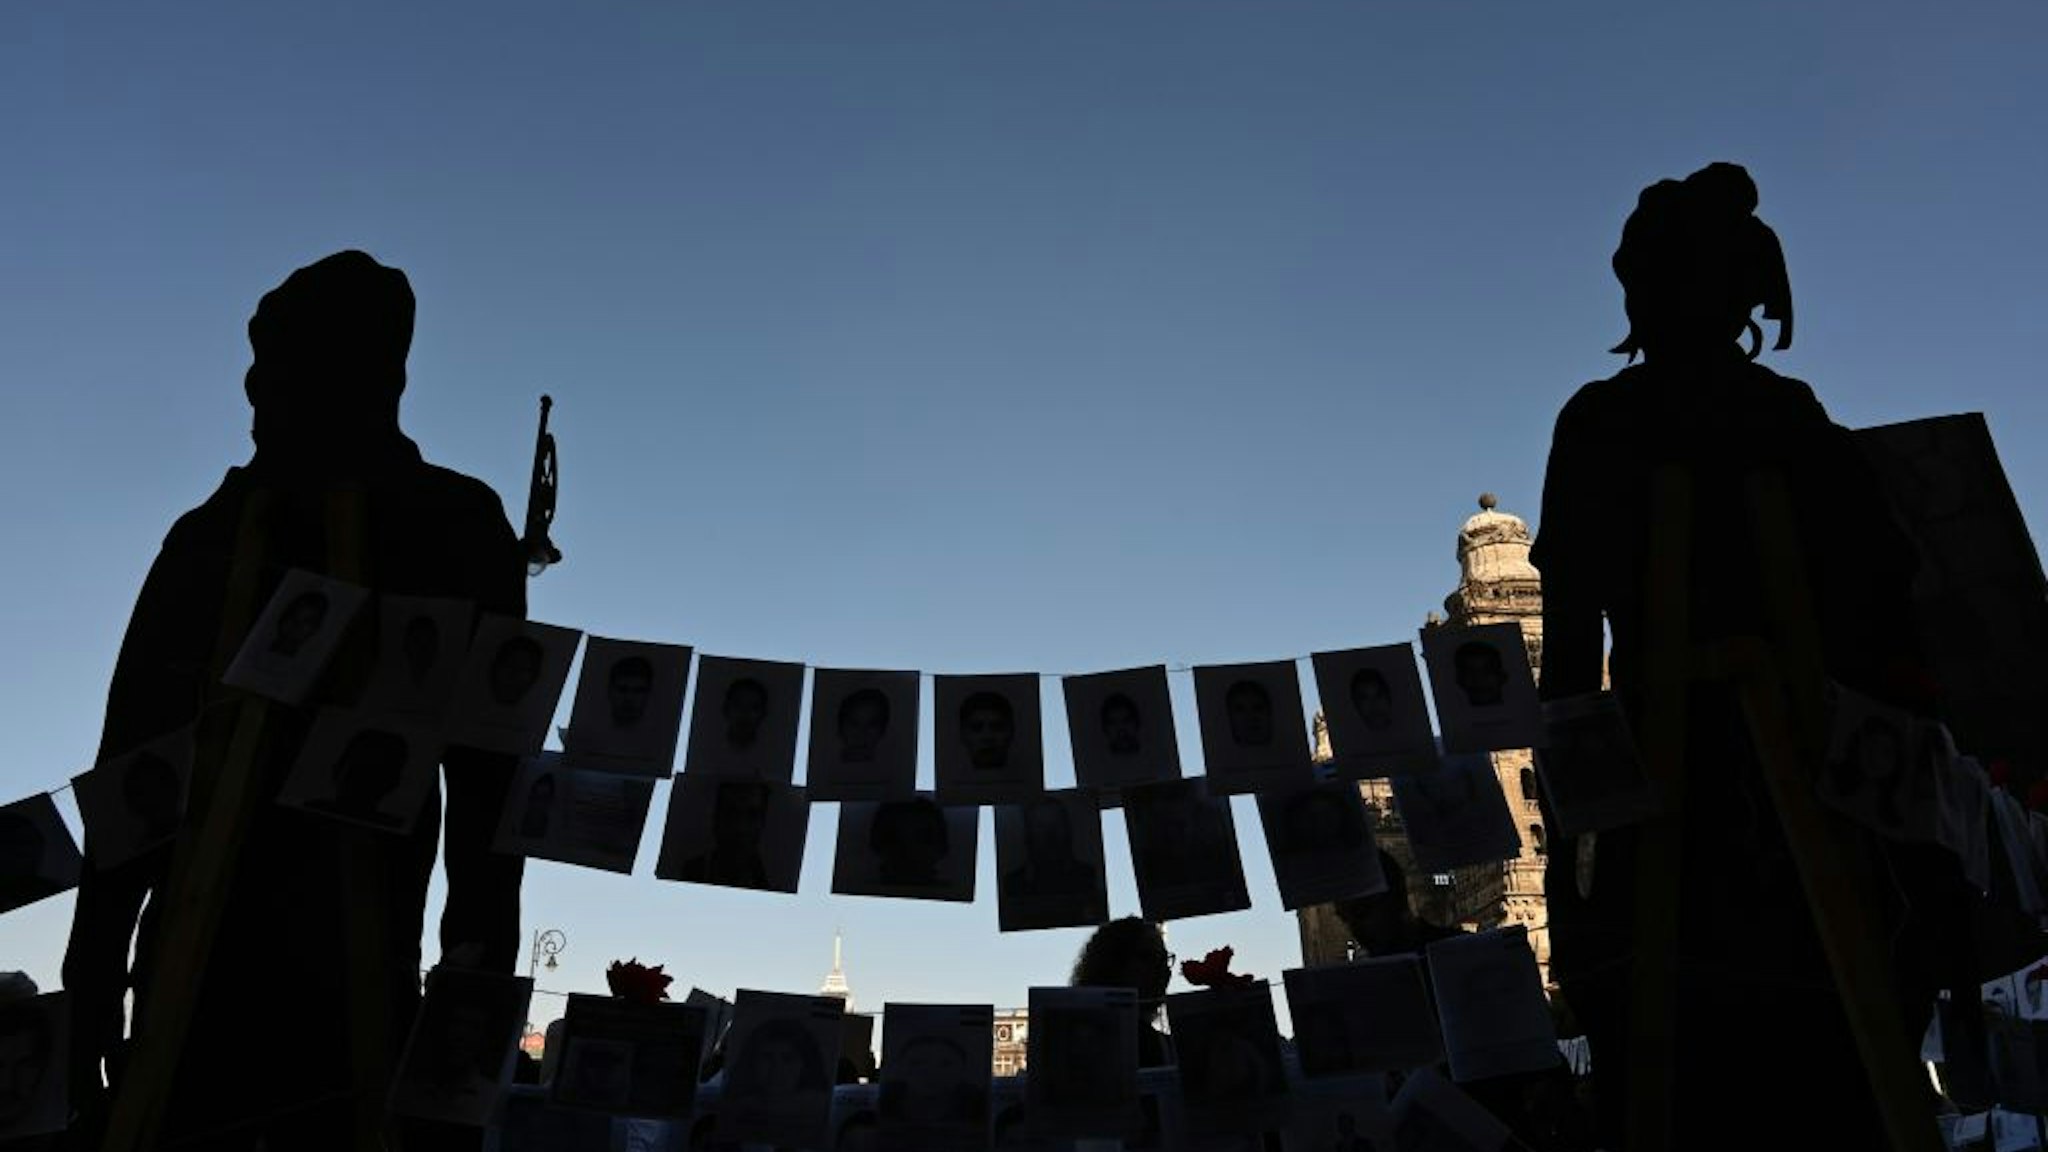 Pictures of missing persons hang from a rope in front of the National Palace during the commemoration of the International Day of the Disappeared in Mexico City, on August 30, 2019. - More than 40,000 people are missing in Mexico, which has been swept by a wave of violence since the government declared war on the country's powerful drug cartels in 2006. (Photo by RODRIGO ARANGUA / AFP) (Photo credit should read RODRIGO ARANGUA/AFP via Getty Images)